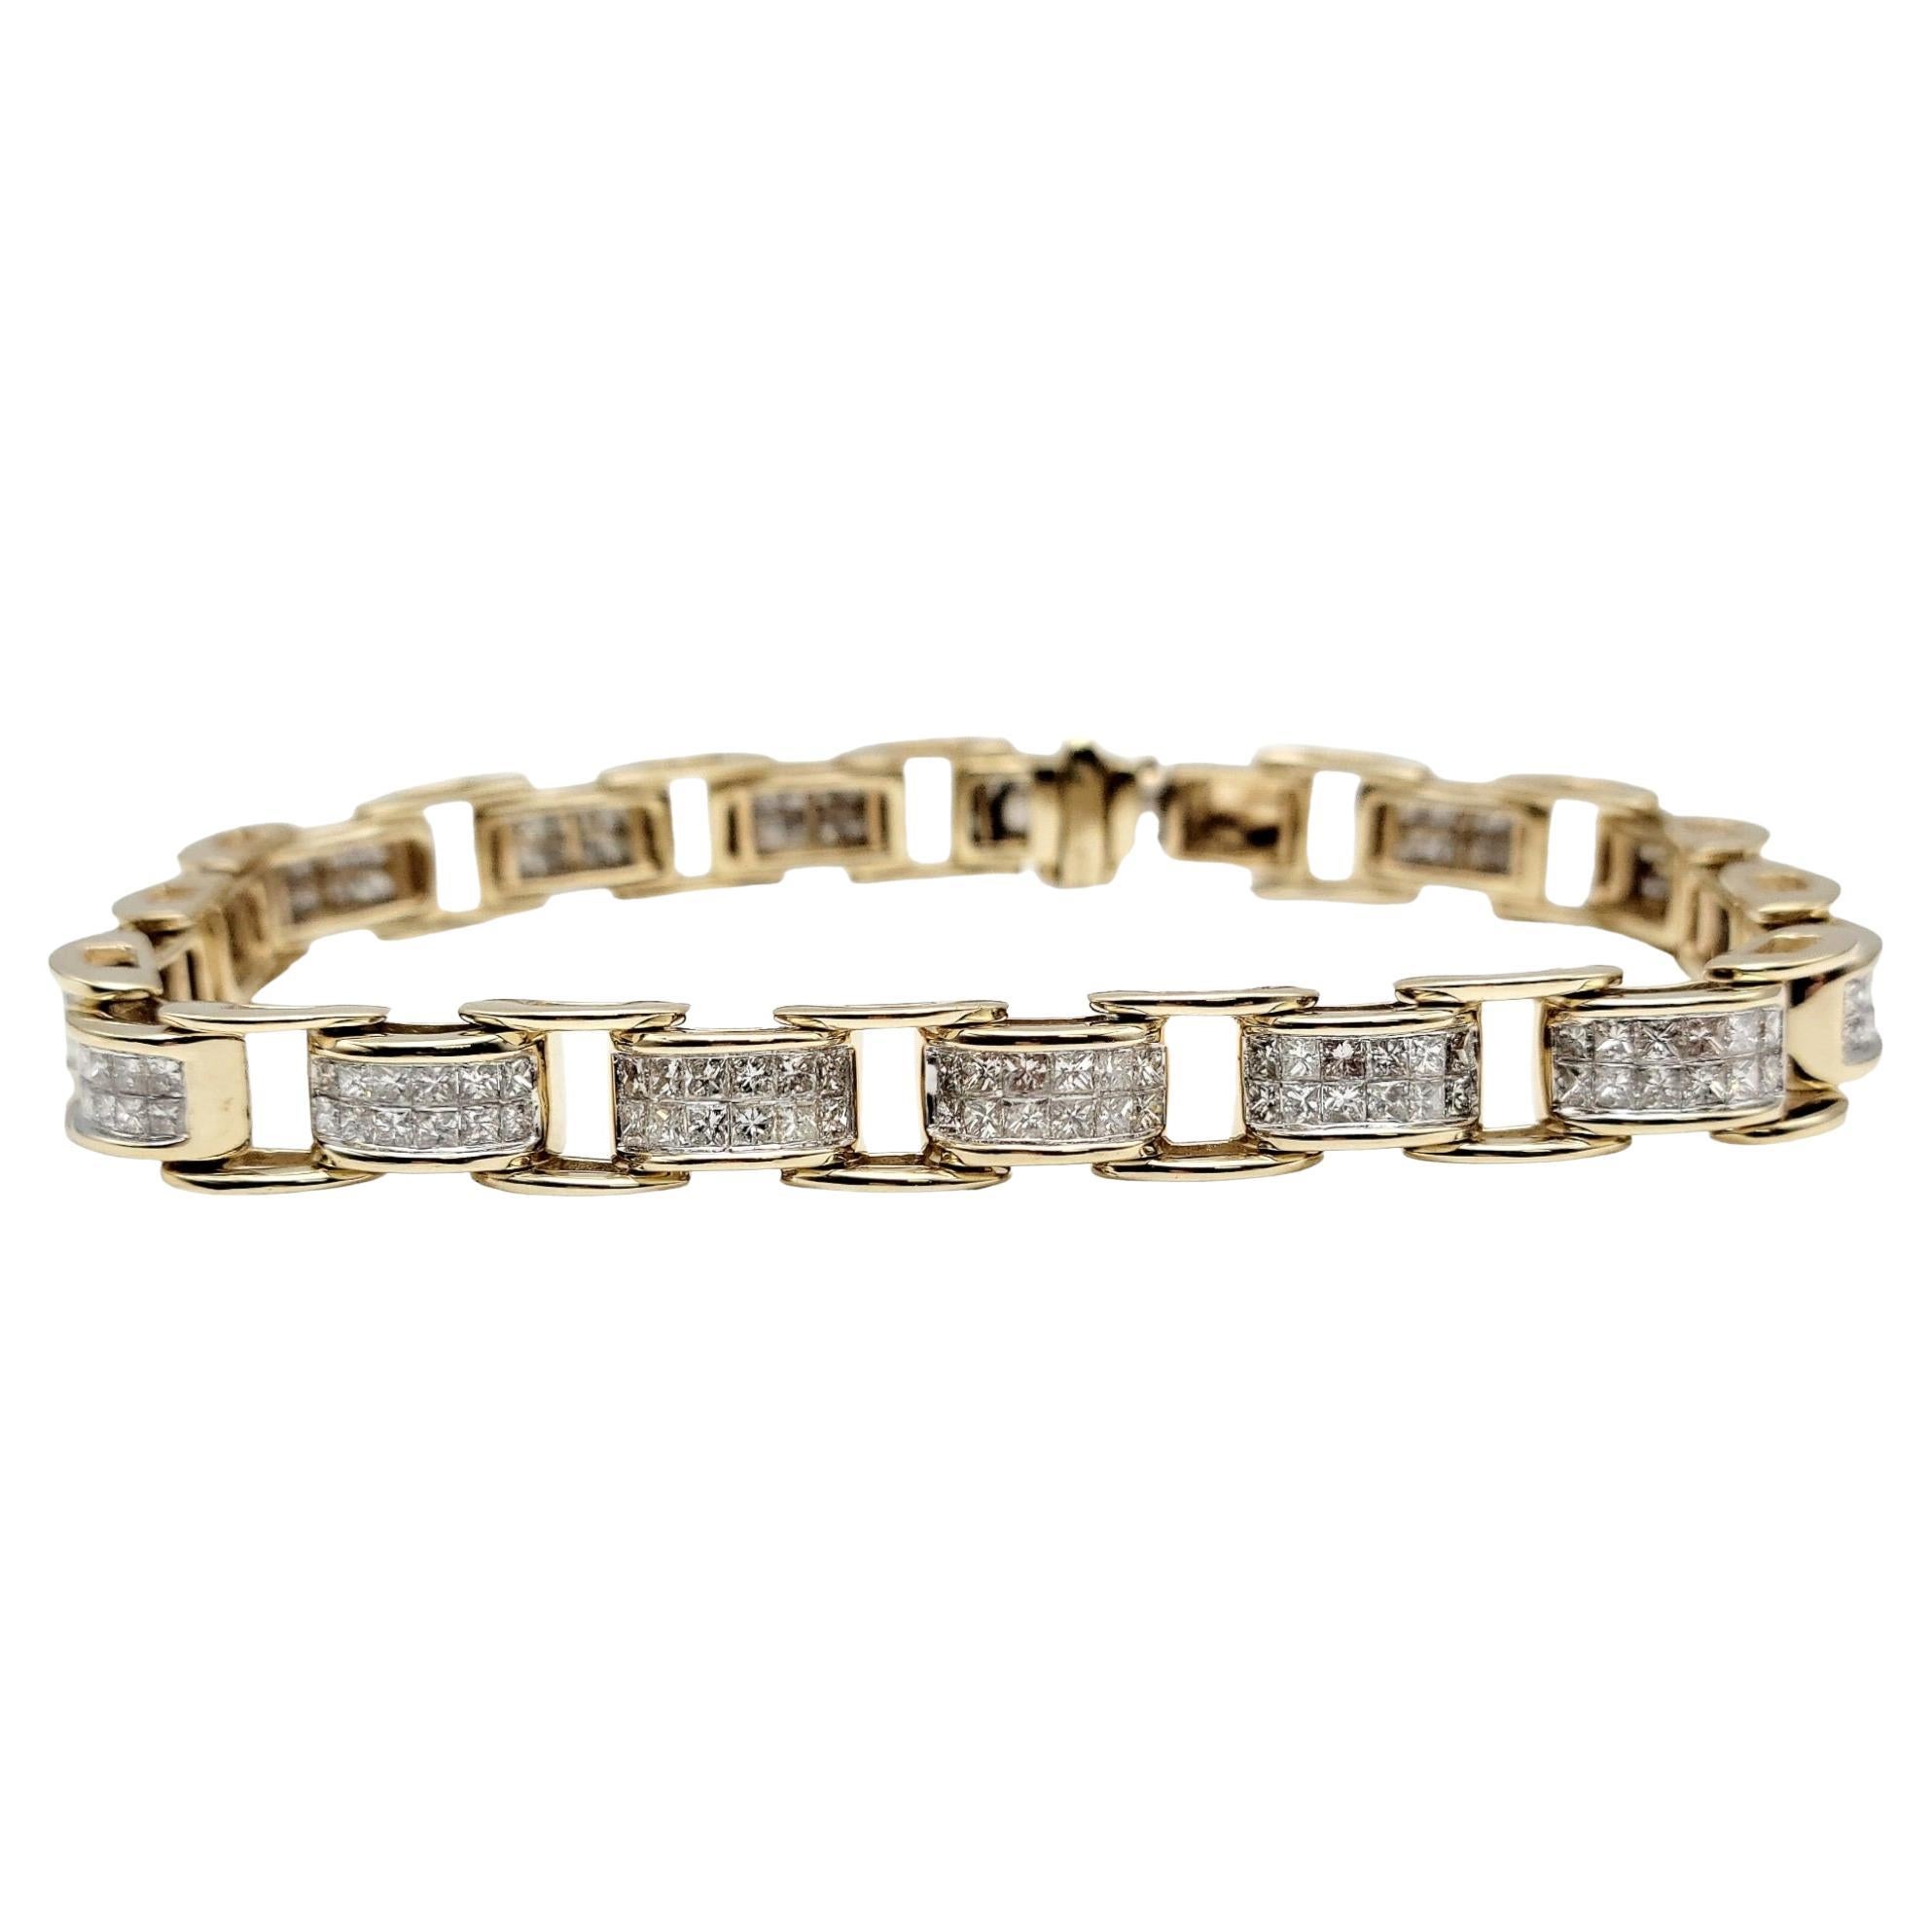 Striking unisex bike chain bracelet is filled from end to end with 5.00 carats of bright icy white natural diamonds. The flexible links hug the wrist for a comfortable and secure fit, while the gentle movement allows for massive sparkle from all